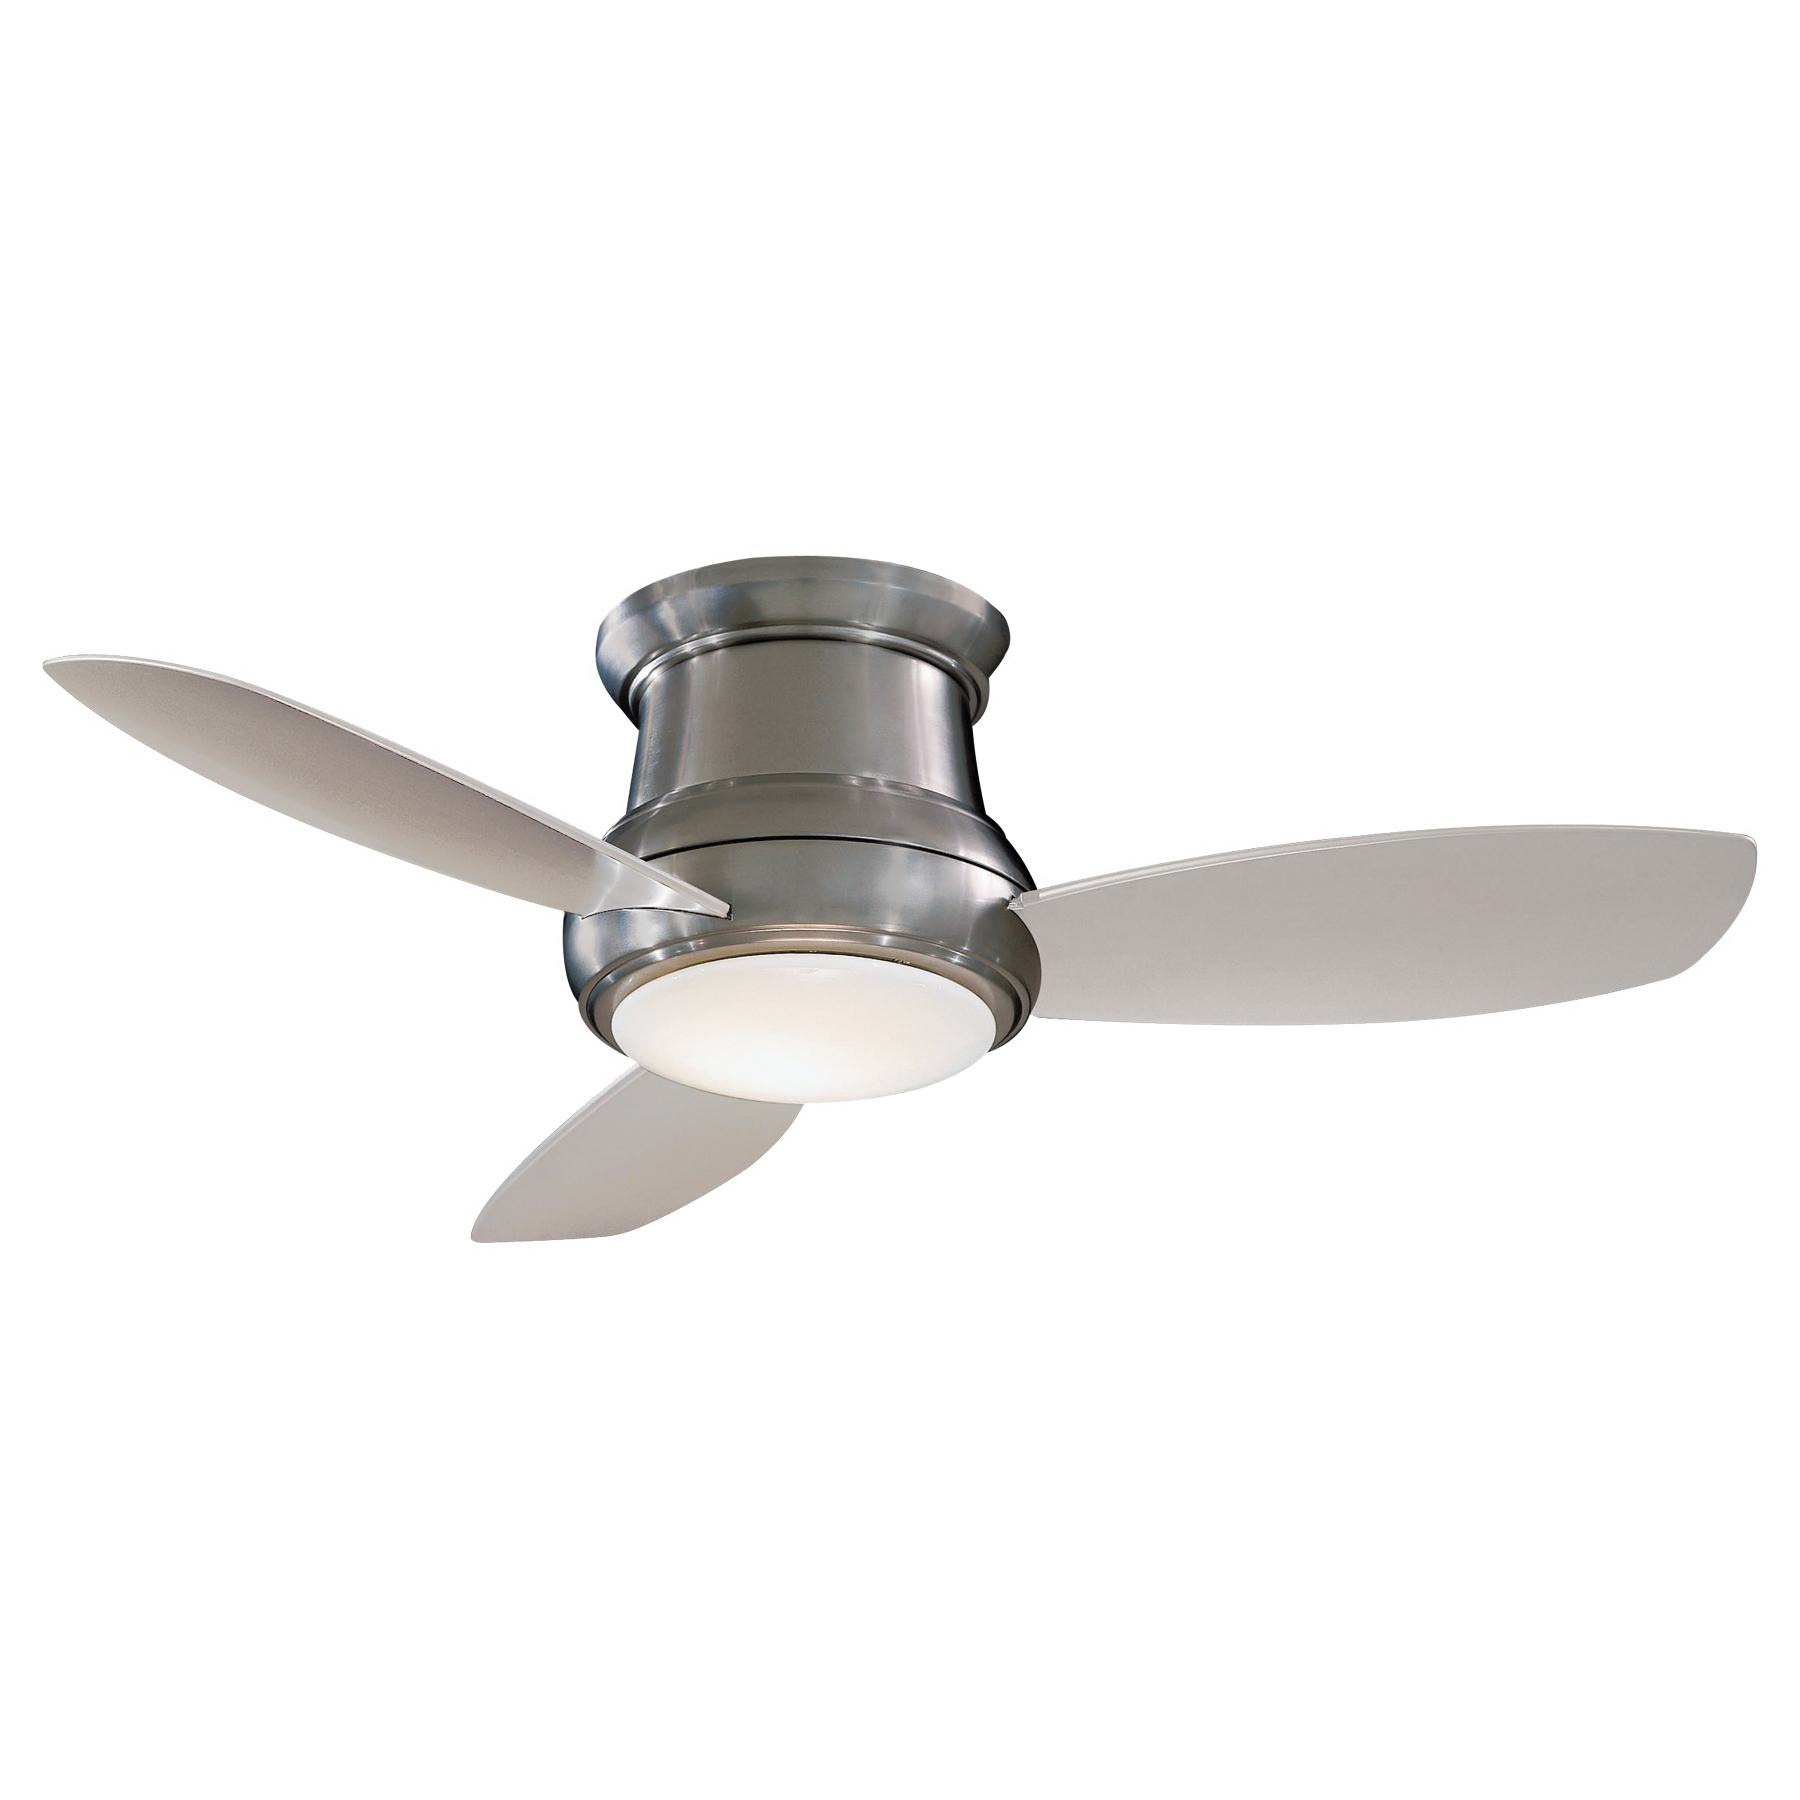 Minka Aire F518l Bn Ceiling Fan With Light 44 Inch 3 Blade 3 Speed